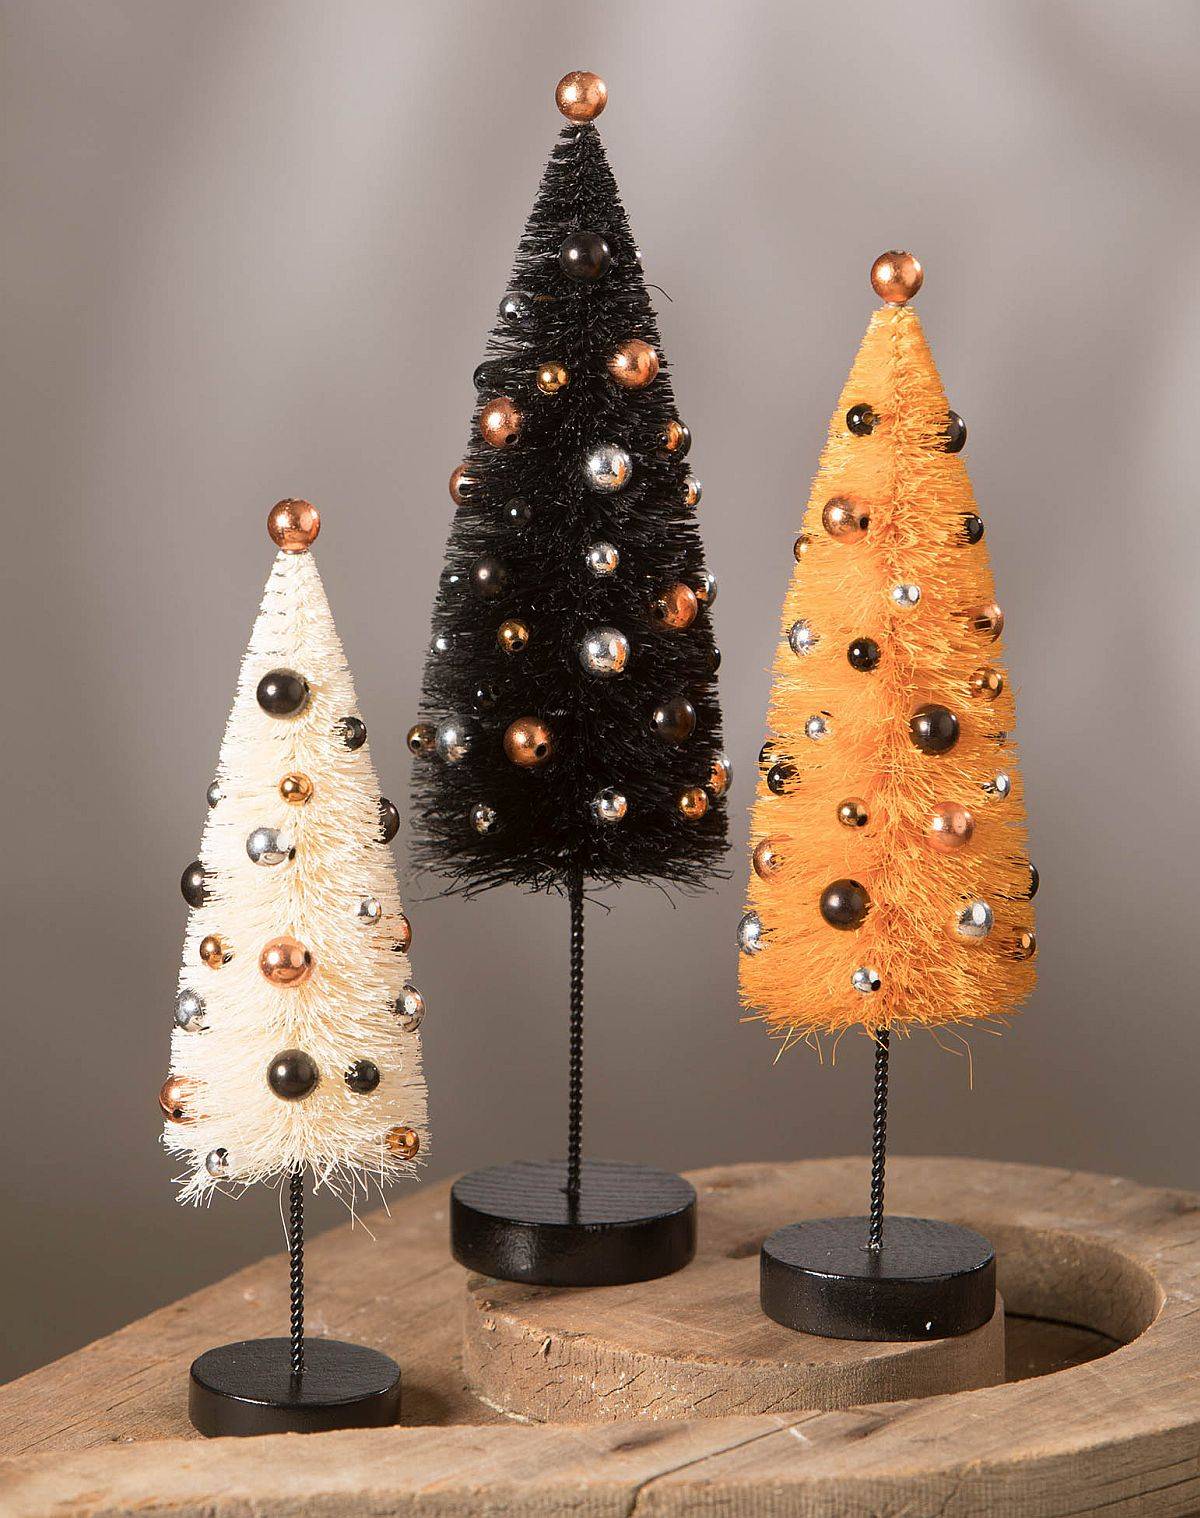 Small Halloween trees crafted from bottle brushes are great for the minimal Halloween table